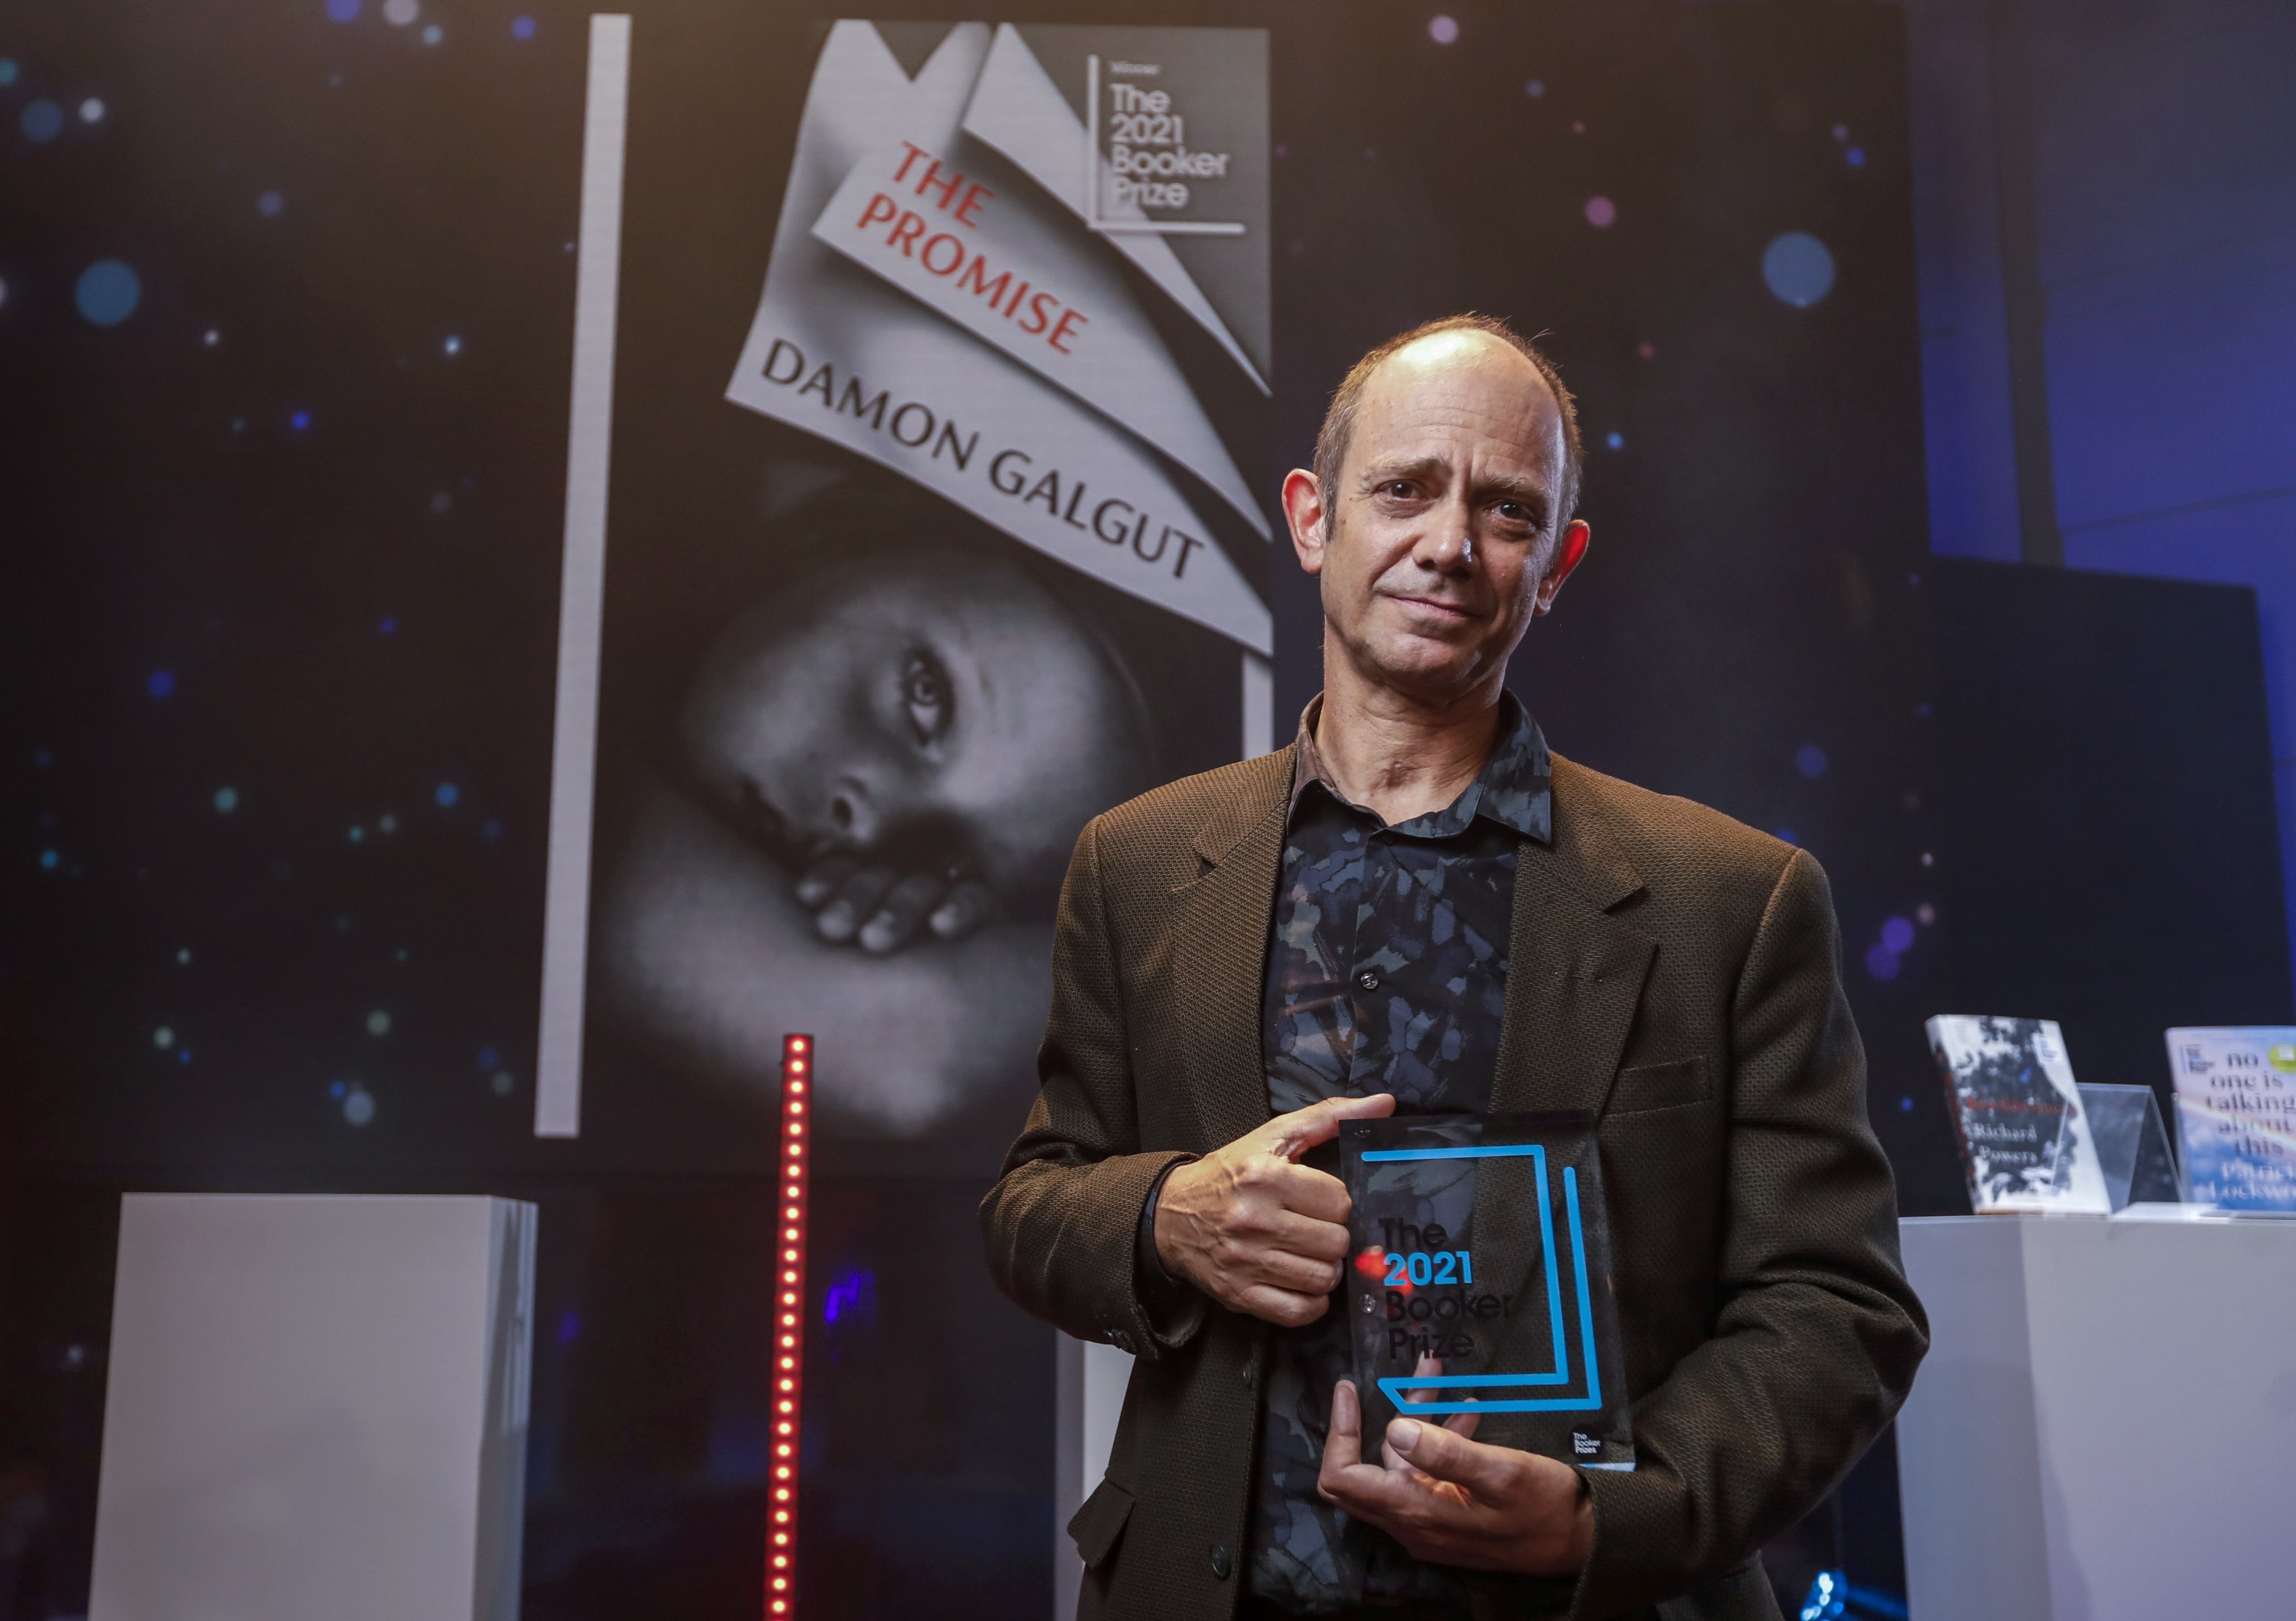 South African author Damon Galgut, winner of the 2021 Booker Prize for Fiction, at the awards ceremony at the BBC Radio Theatre in London on November 3. The annual prize, for the best original novel, written in the English language and published in the UK, was awarded for his book The Promise. Phoyoz; EPA-EFE/David Parry/PA Wire /The Booker Prize Press Office.